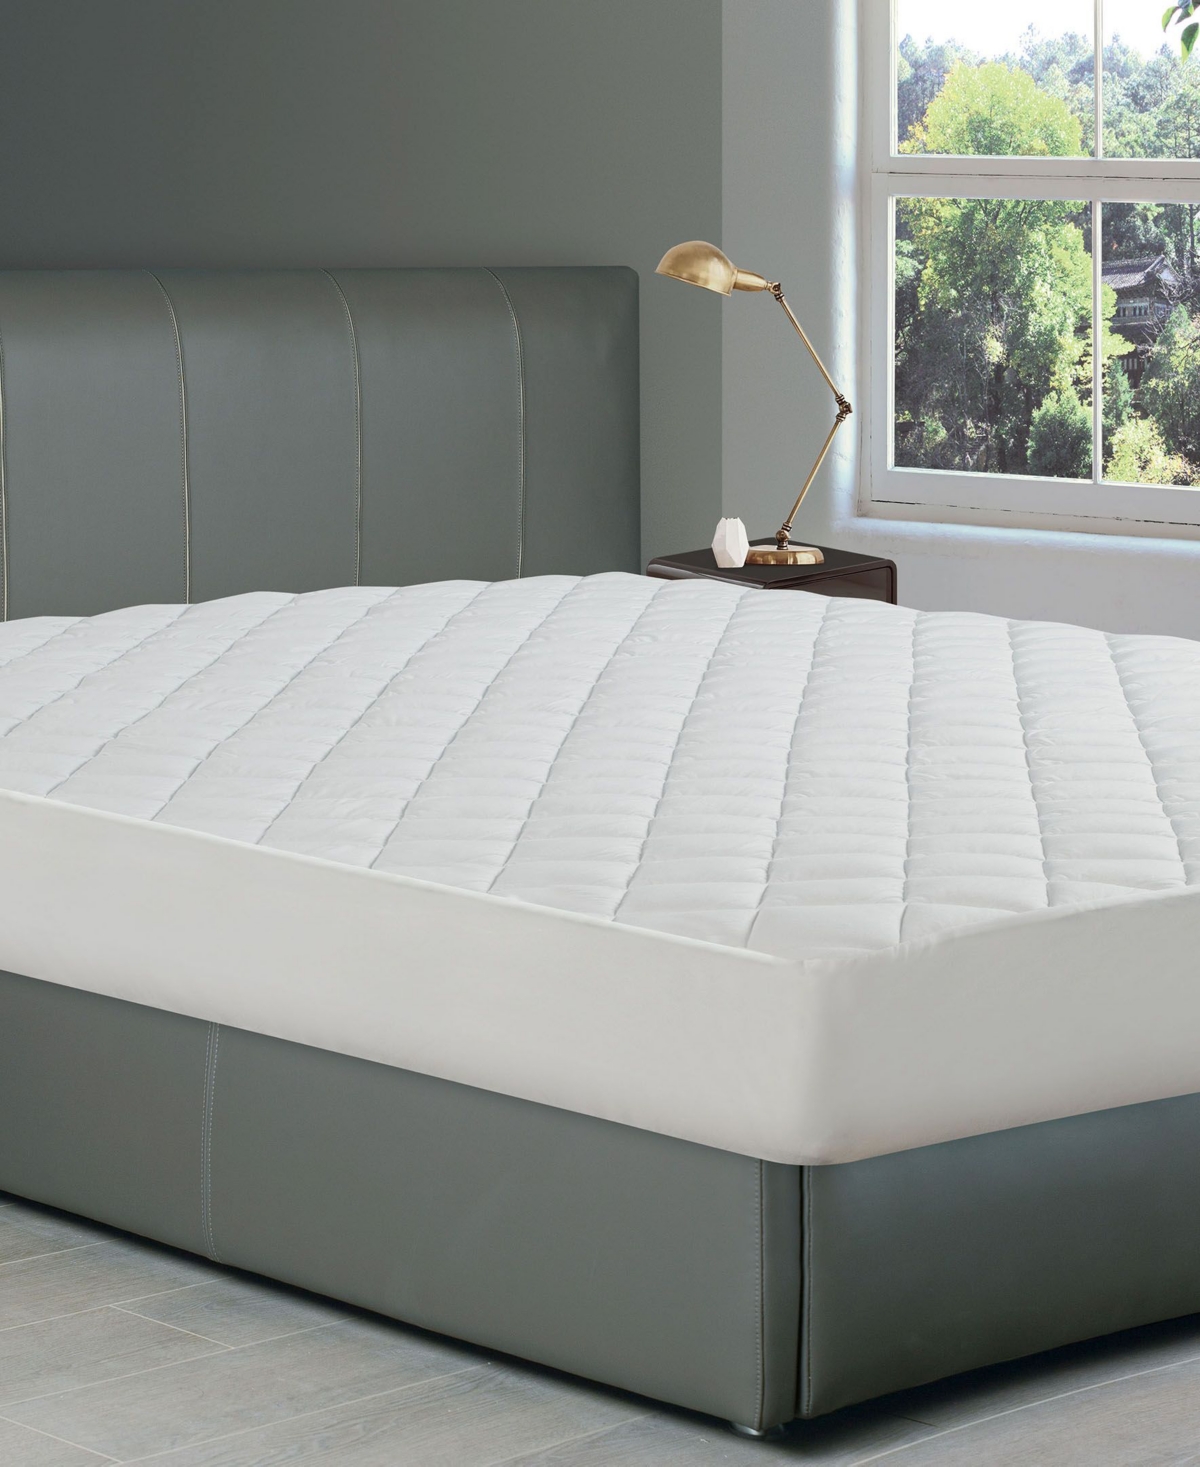 All-In-One Ultra Fresh Odor Control Fitted Mattress Pad, Full